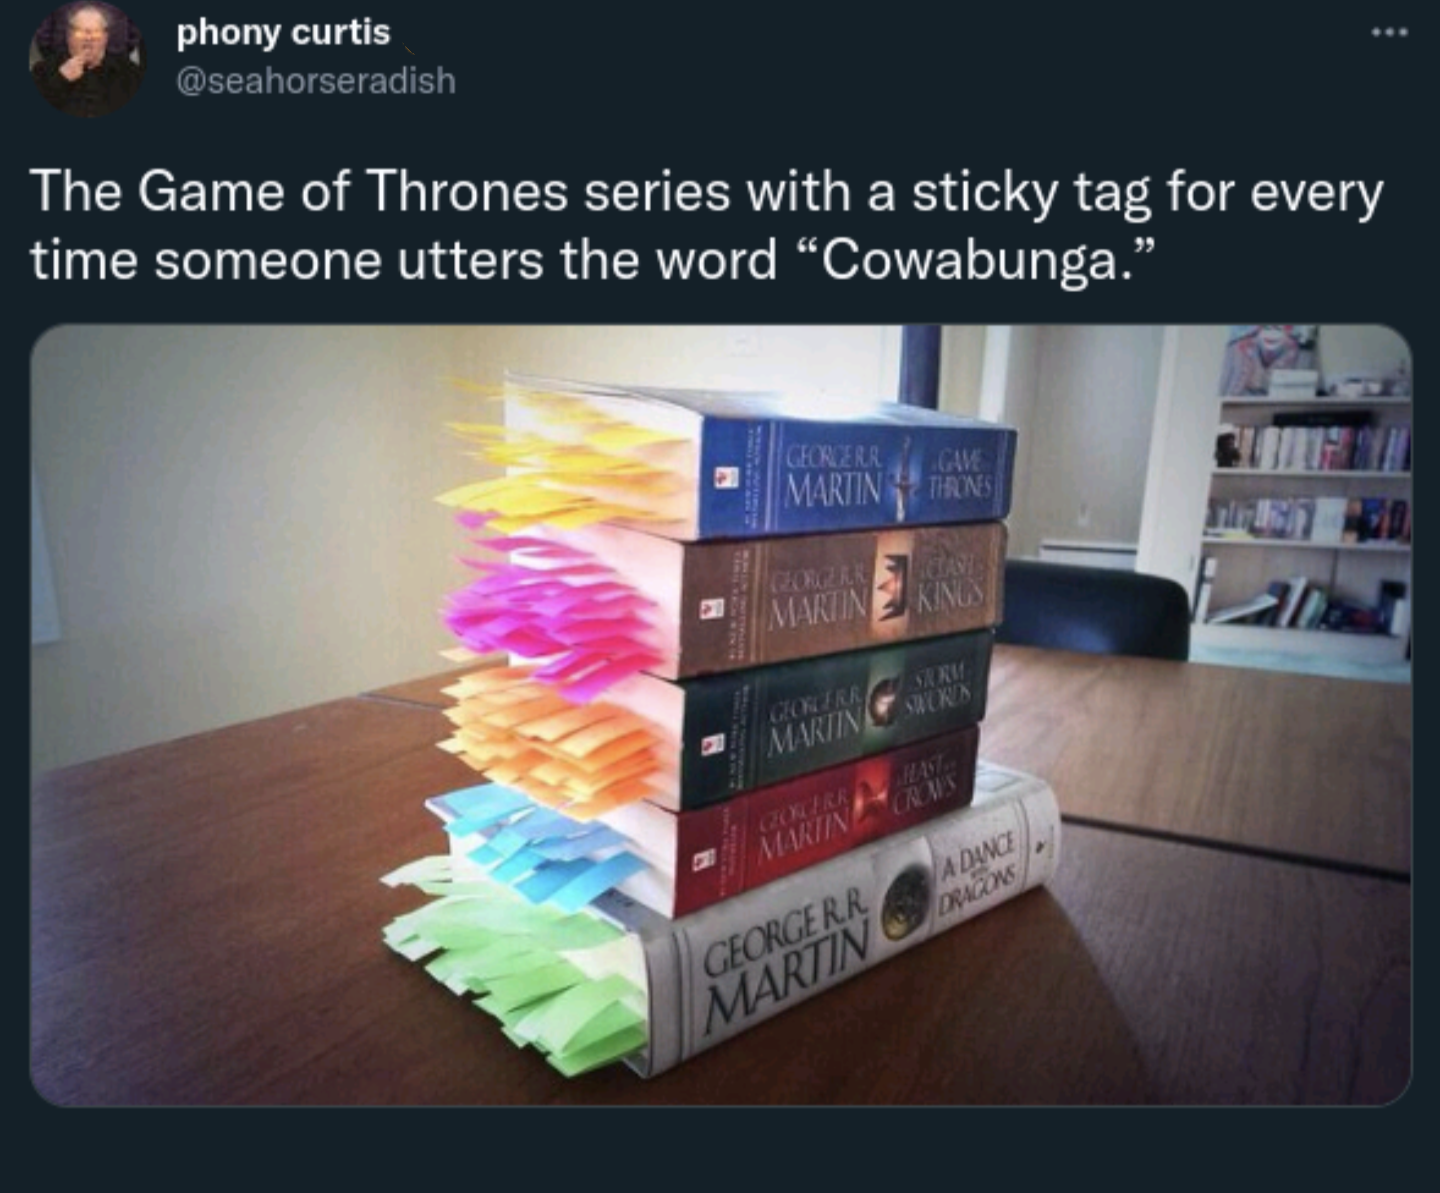 savage tweets of the week - game of thrones sticky note death - phony curtis The Game of Thrones series with a sticky tag for every time someone utters the word "Cowabunga." H Georgerr Gave Martin Throns Martin Kings Dorian Martin Quiere Martin Georgerr M